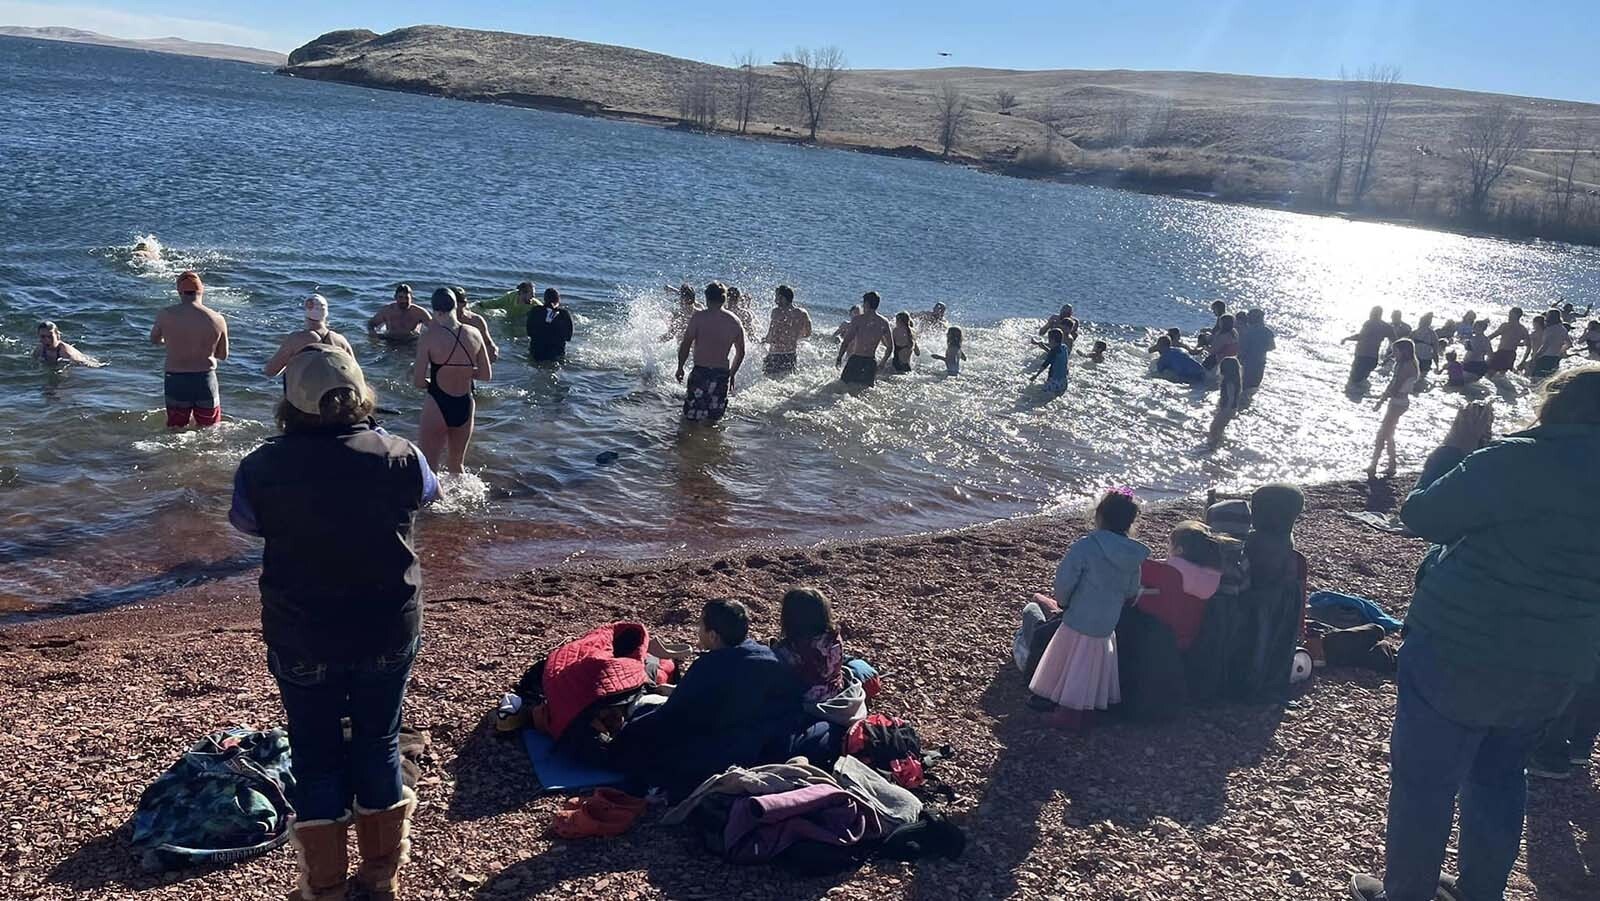 When Lake De Smet hasn't frozen over by New Year's Day, like this year, everyone runs into Lake De Smet at once for the annual polar plunge.